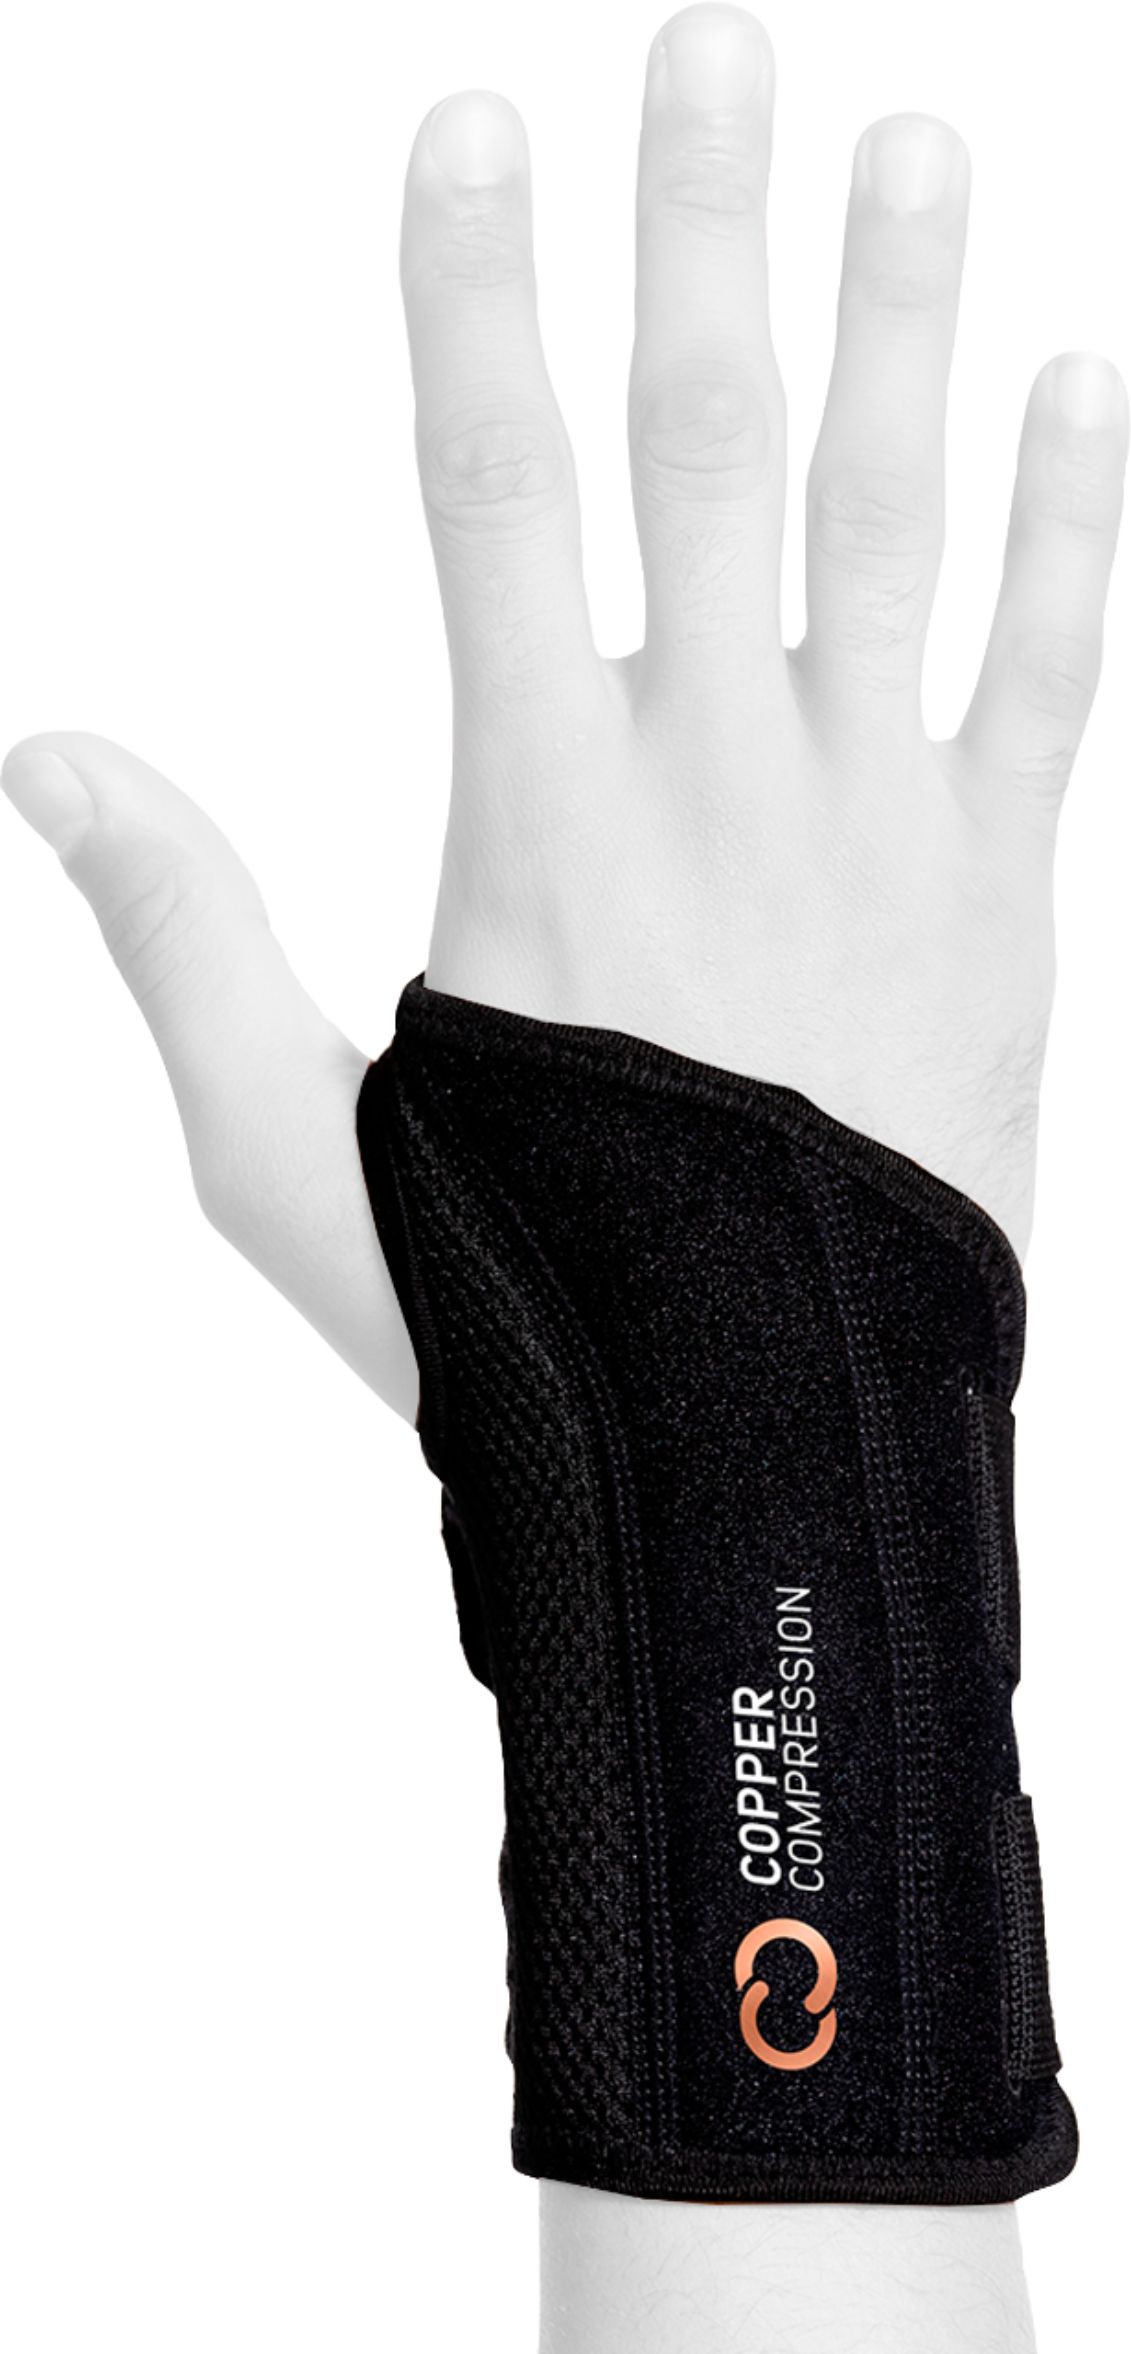 FITITUDE: Infused Copper Compression Wrist Brace with Side Stabilizers